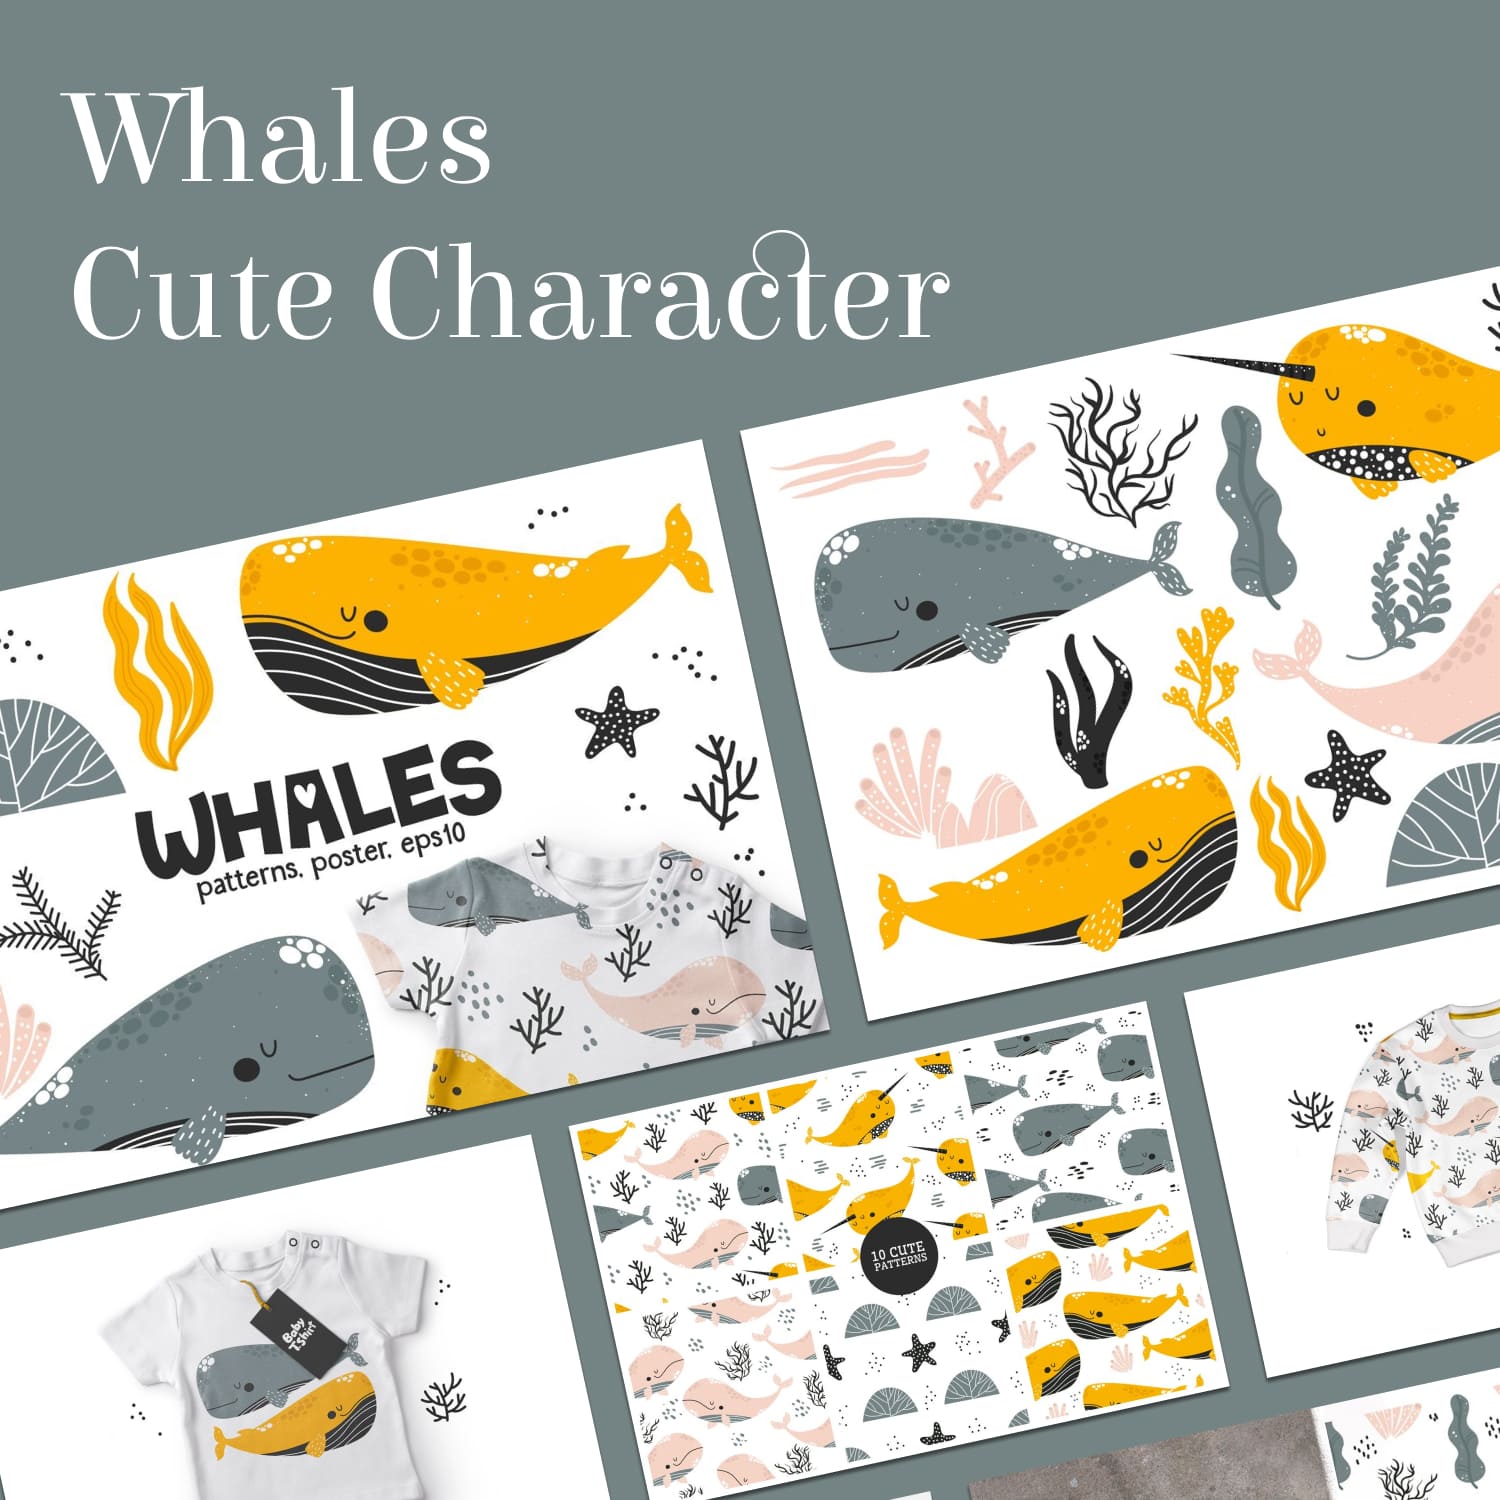 Whales - Cute Character Graphics Set cover image.